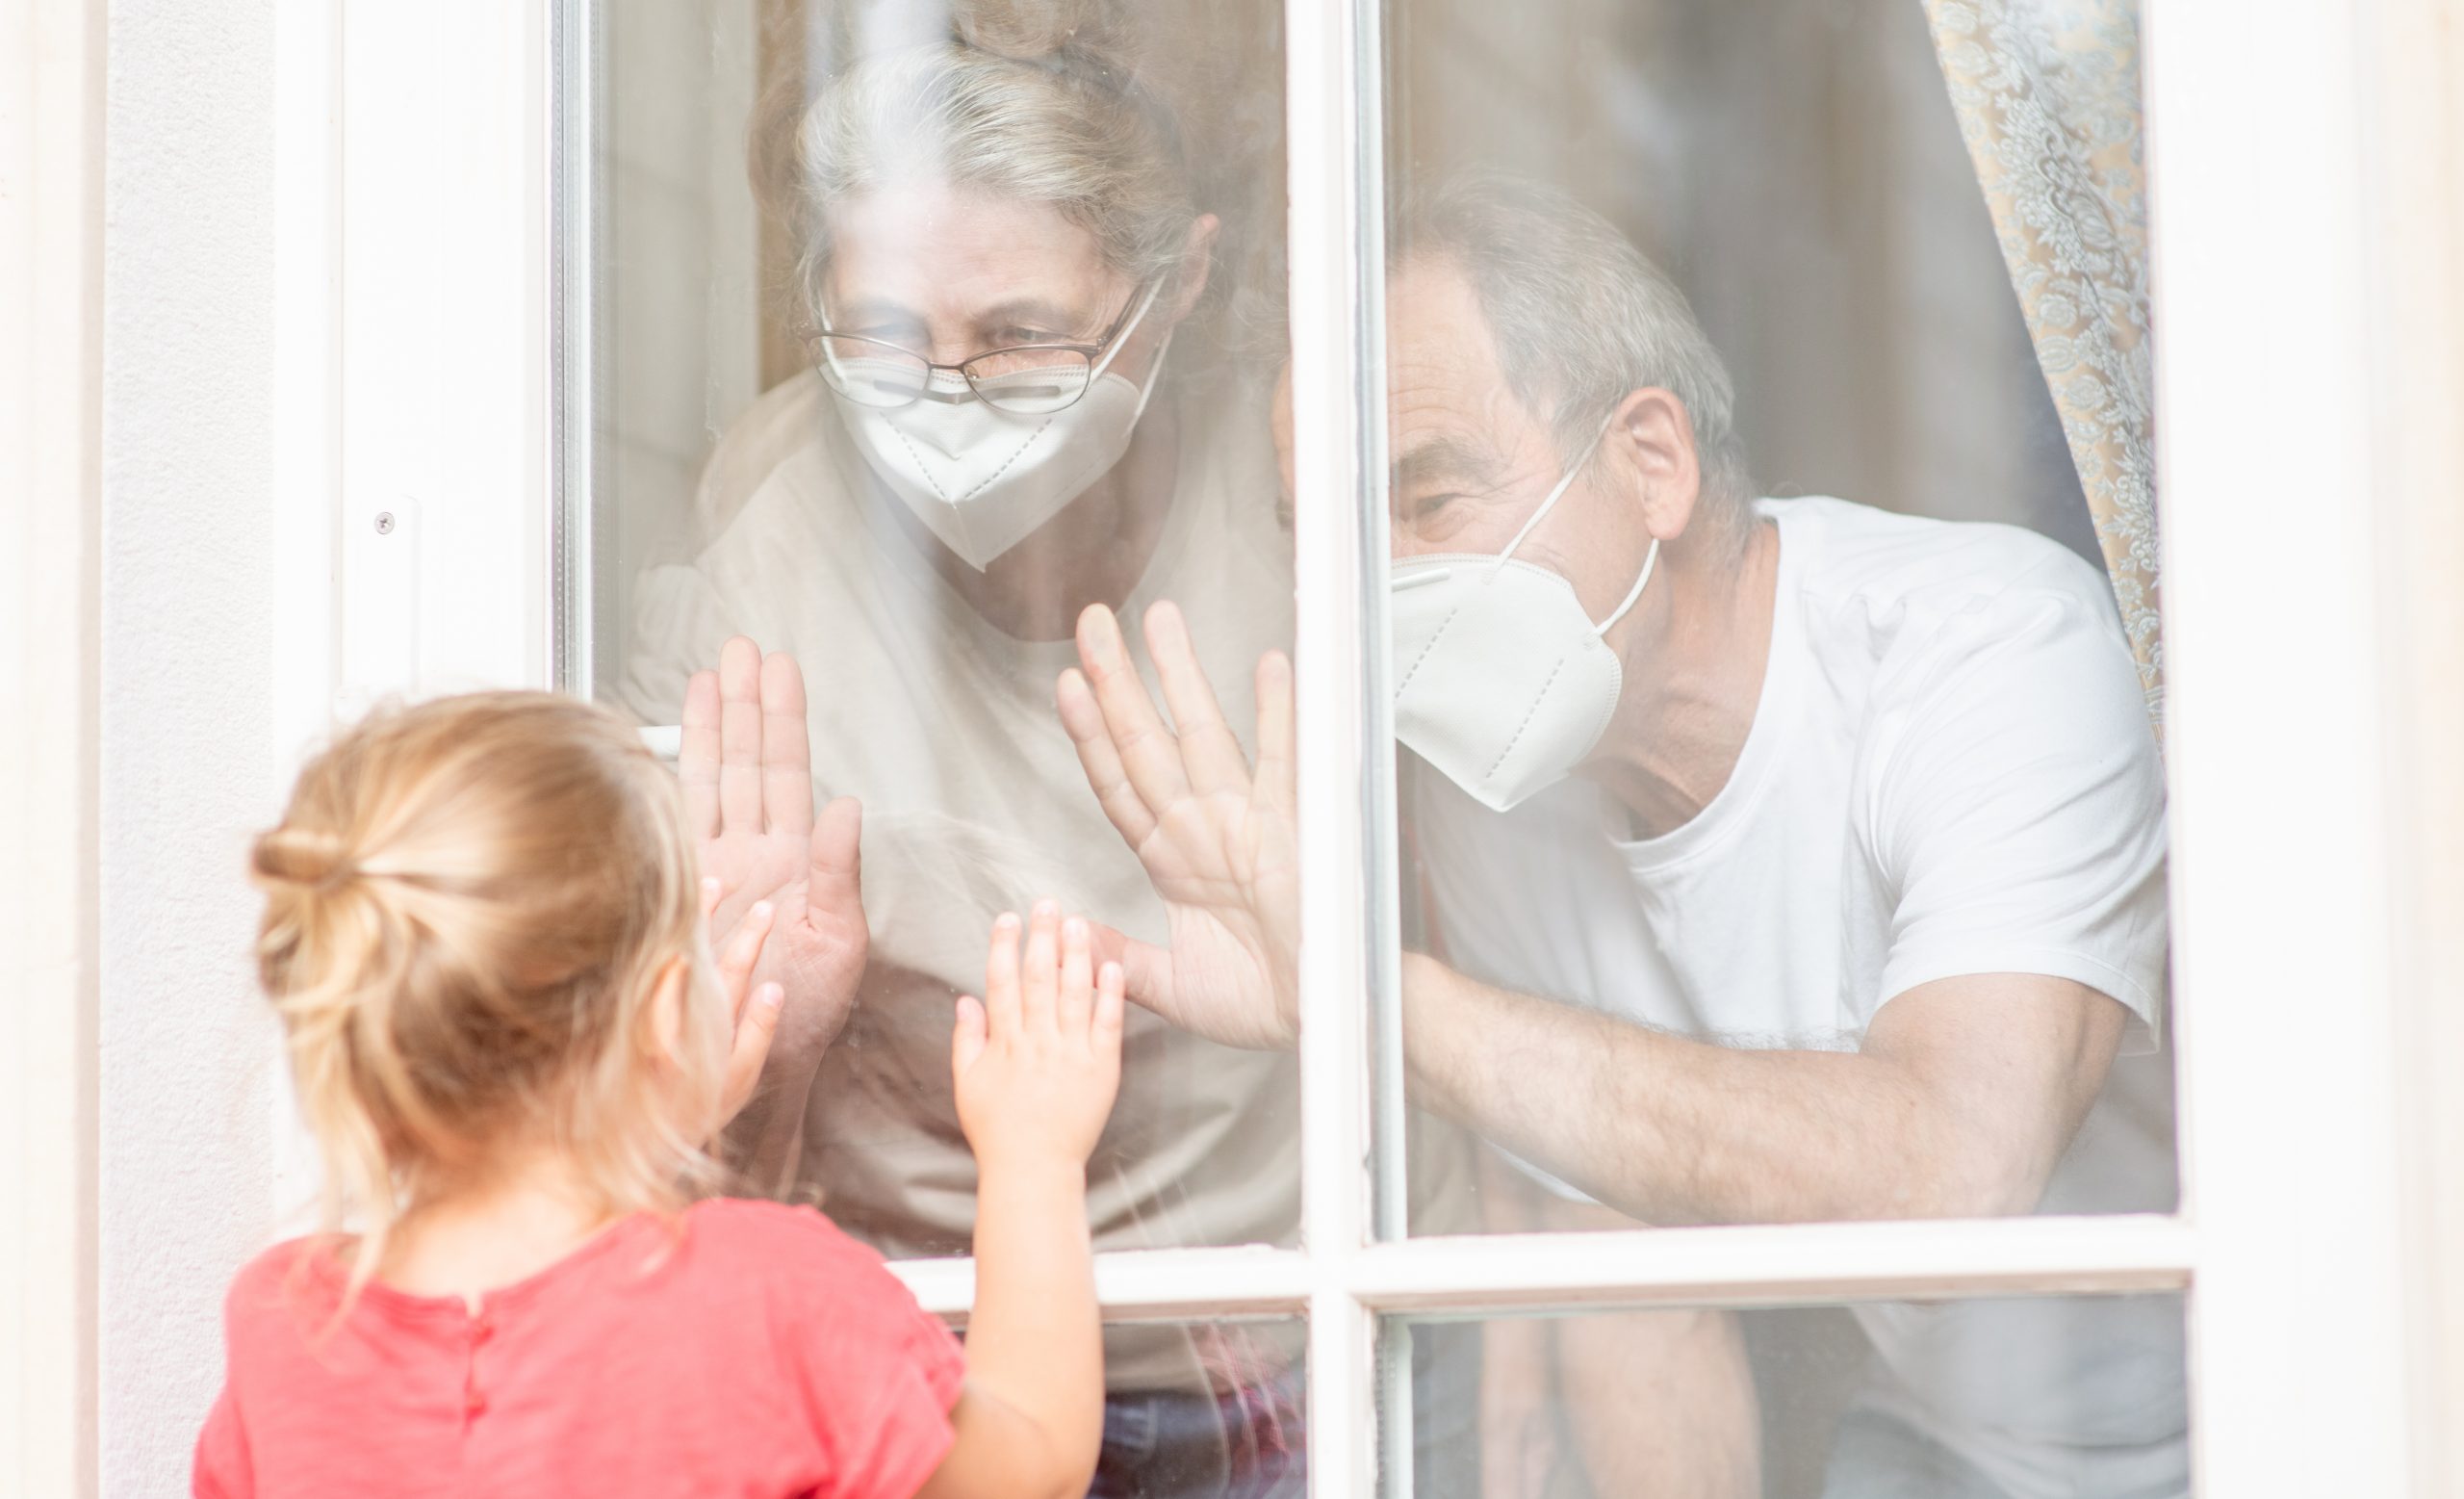 Little girl communicates with his grandparents through a window during the coronavirus epidemic